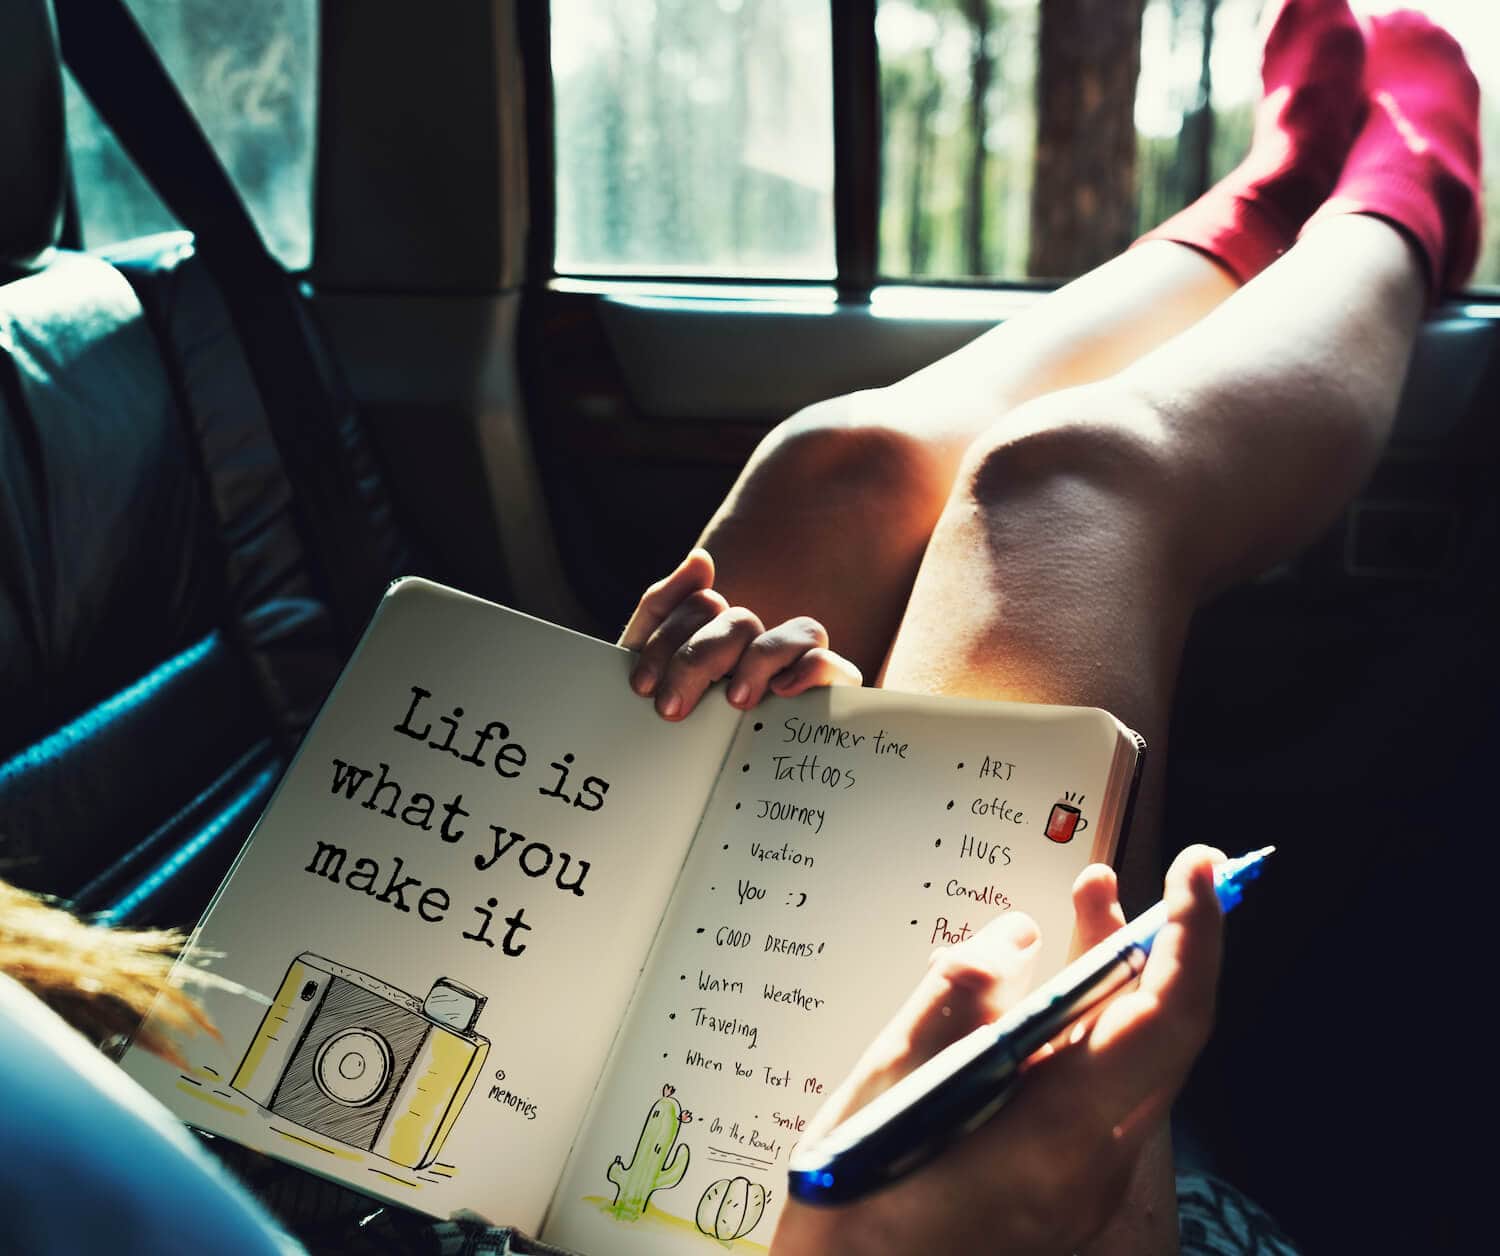 A woman with her legs up on the window of a car while she writes in a travel journal.